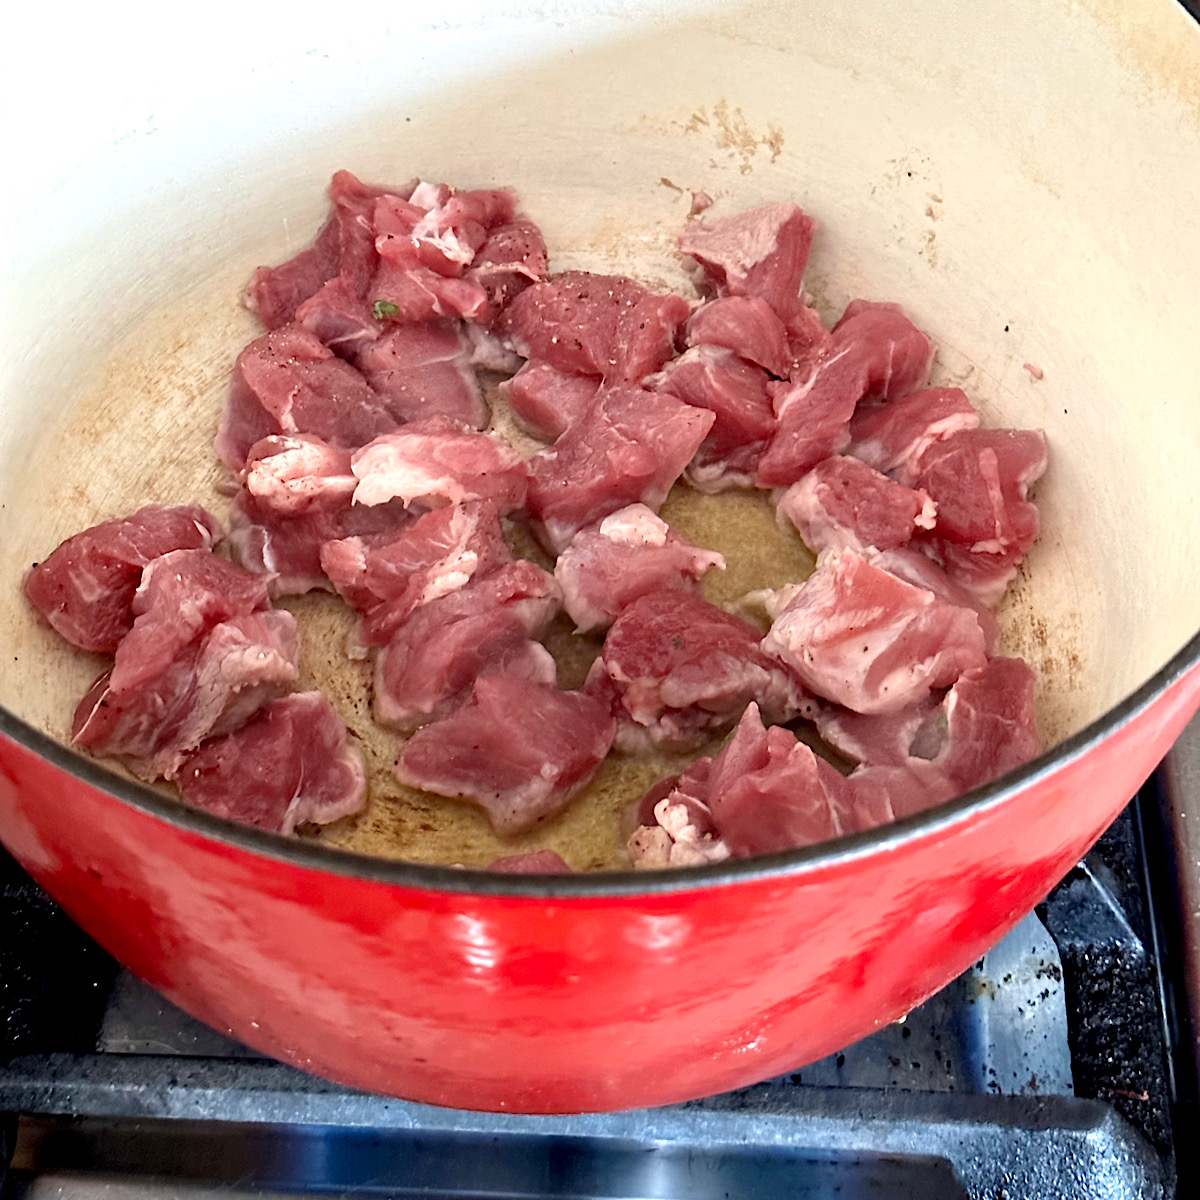 Pork pieces searing in oil in large pot.